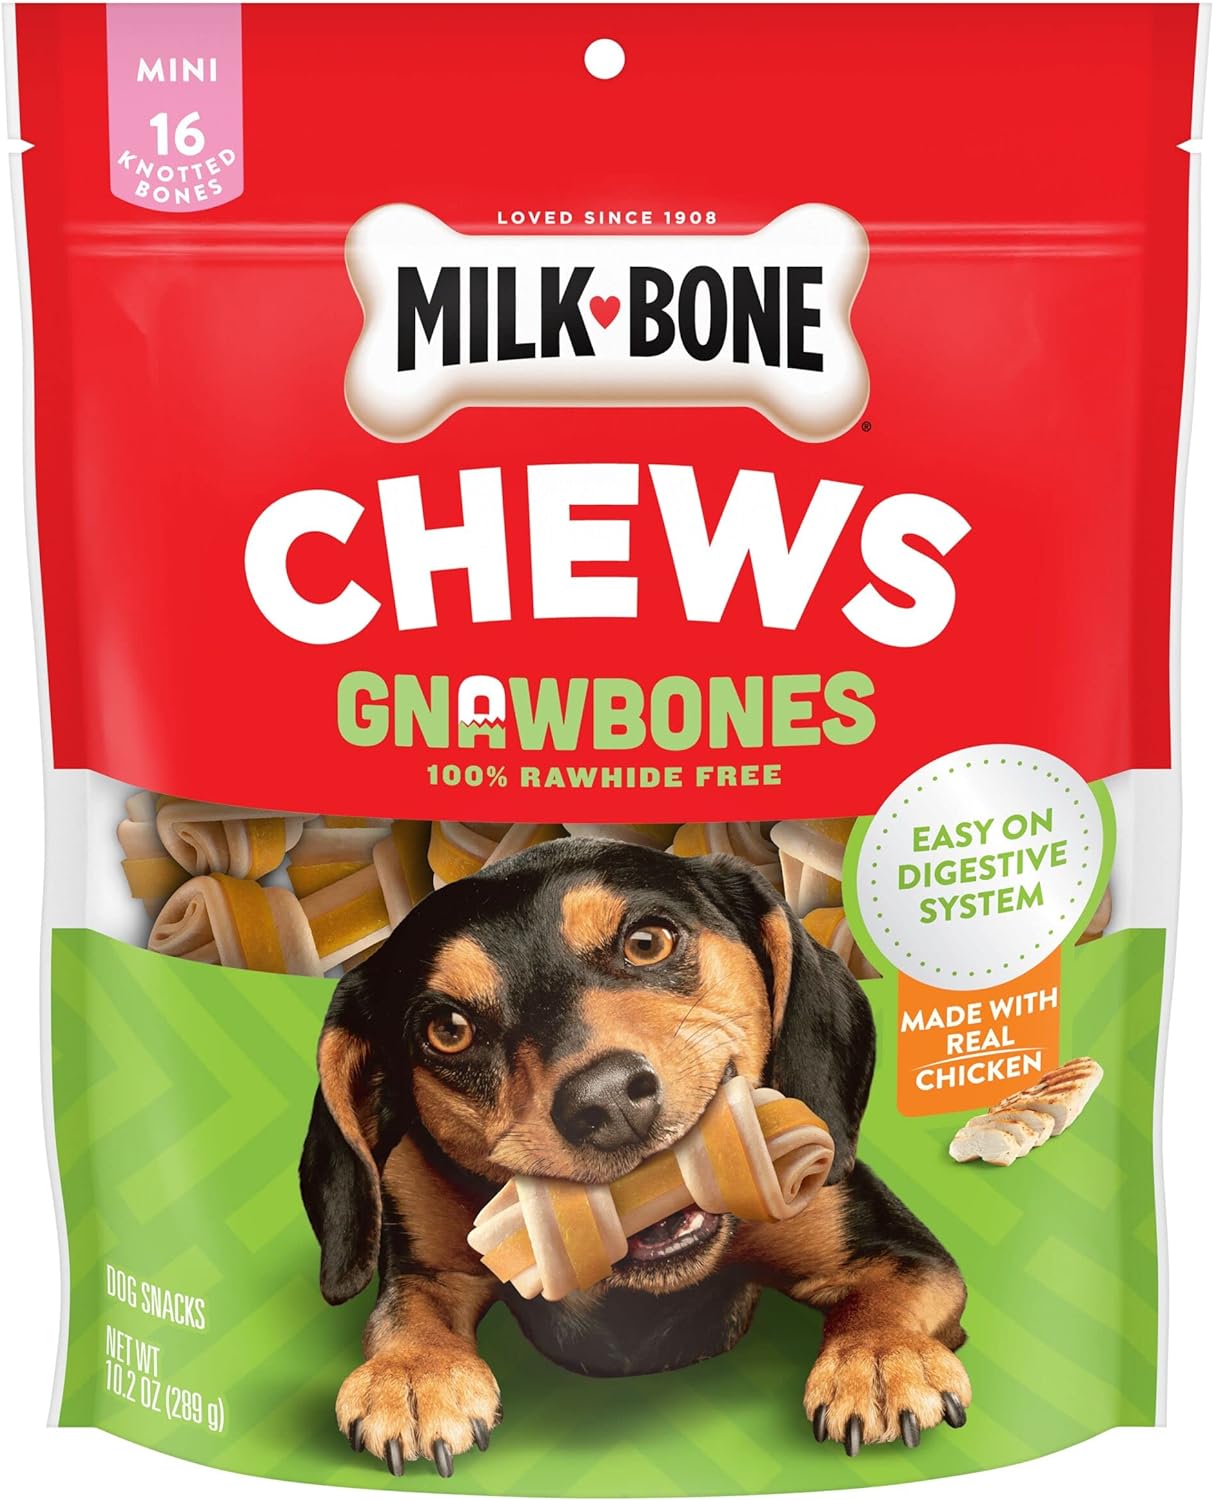 Milk-Bone Chews GnawBones Mini Knotted Bones Dog Treats (Chicken): 16-Count $6.25, 30-Count $10.15 w/ S&S + Free Shipping w/ Prime or on $35+